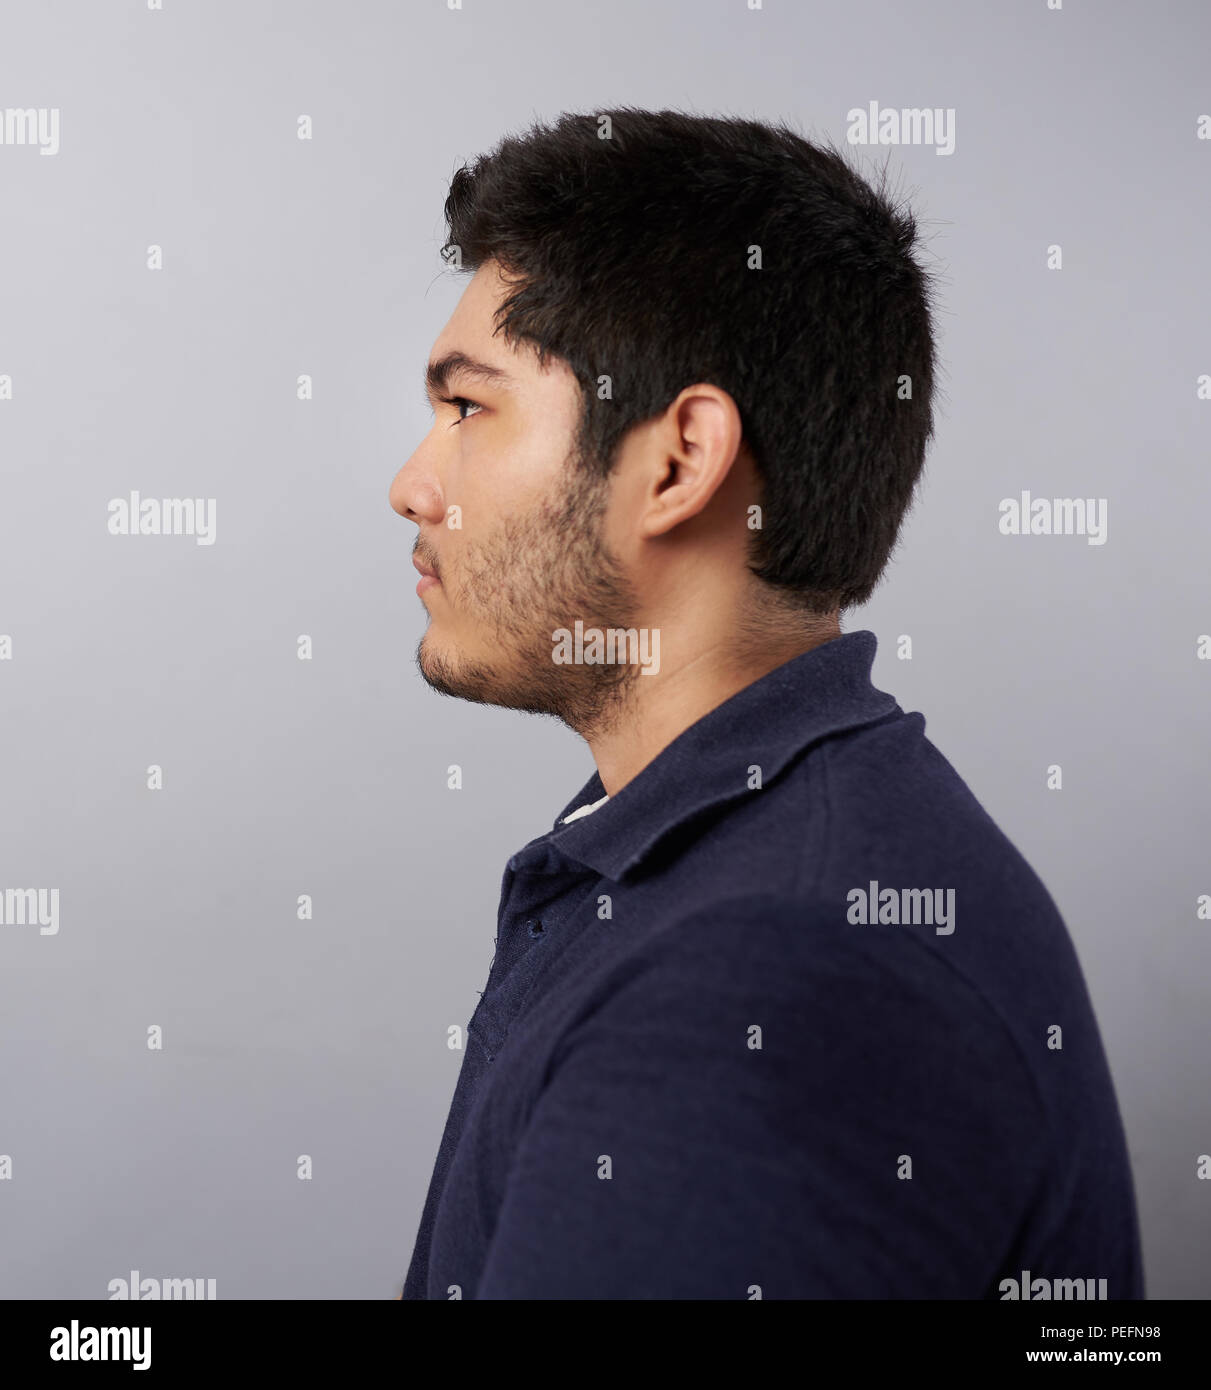 Young man profile view isolated on gray studio background Stock Photo